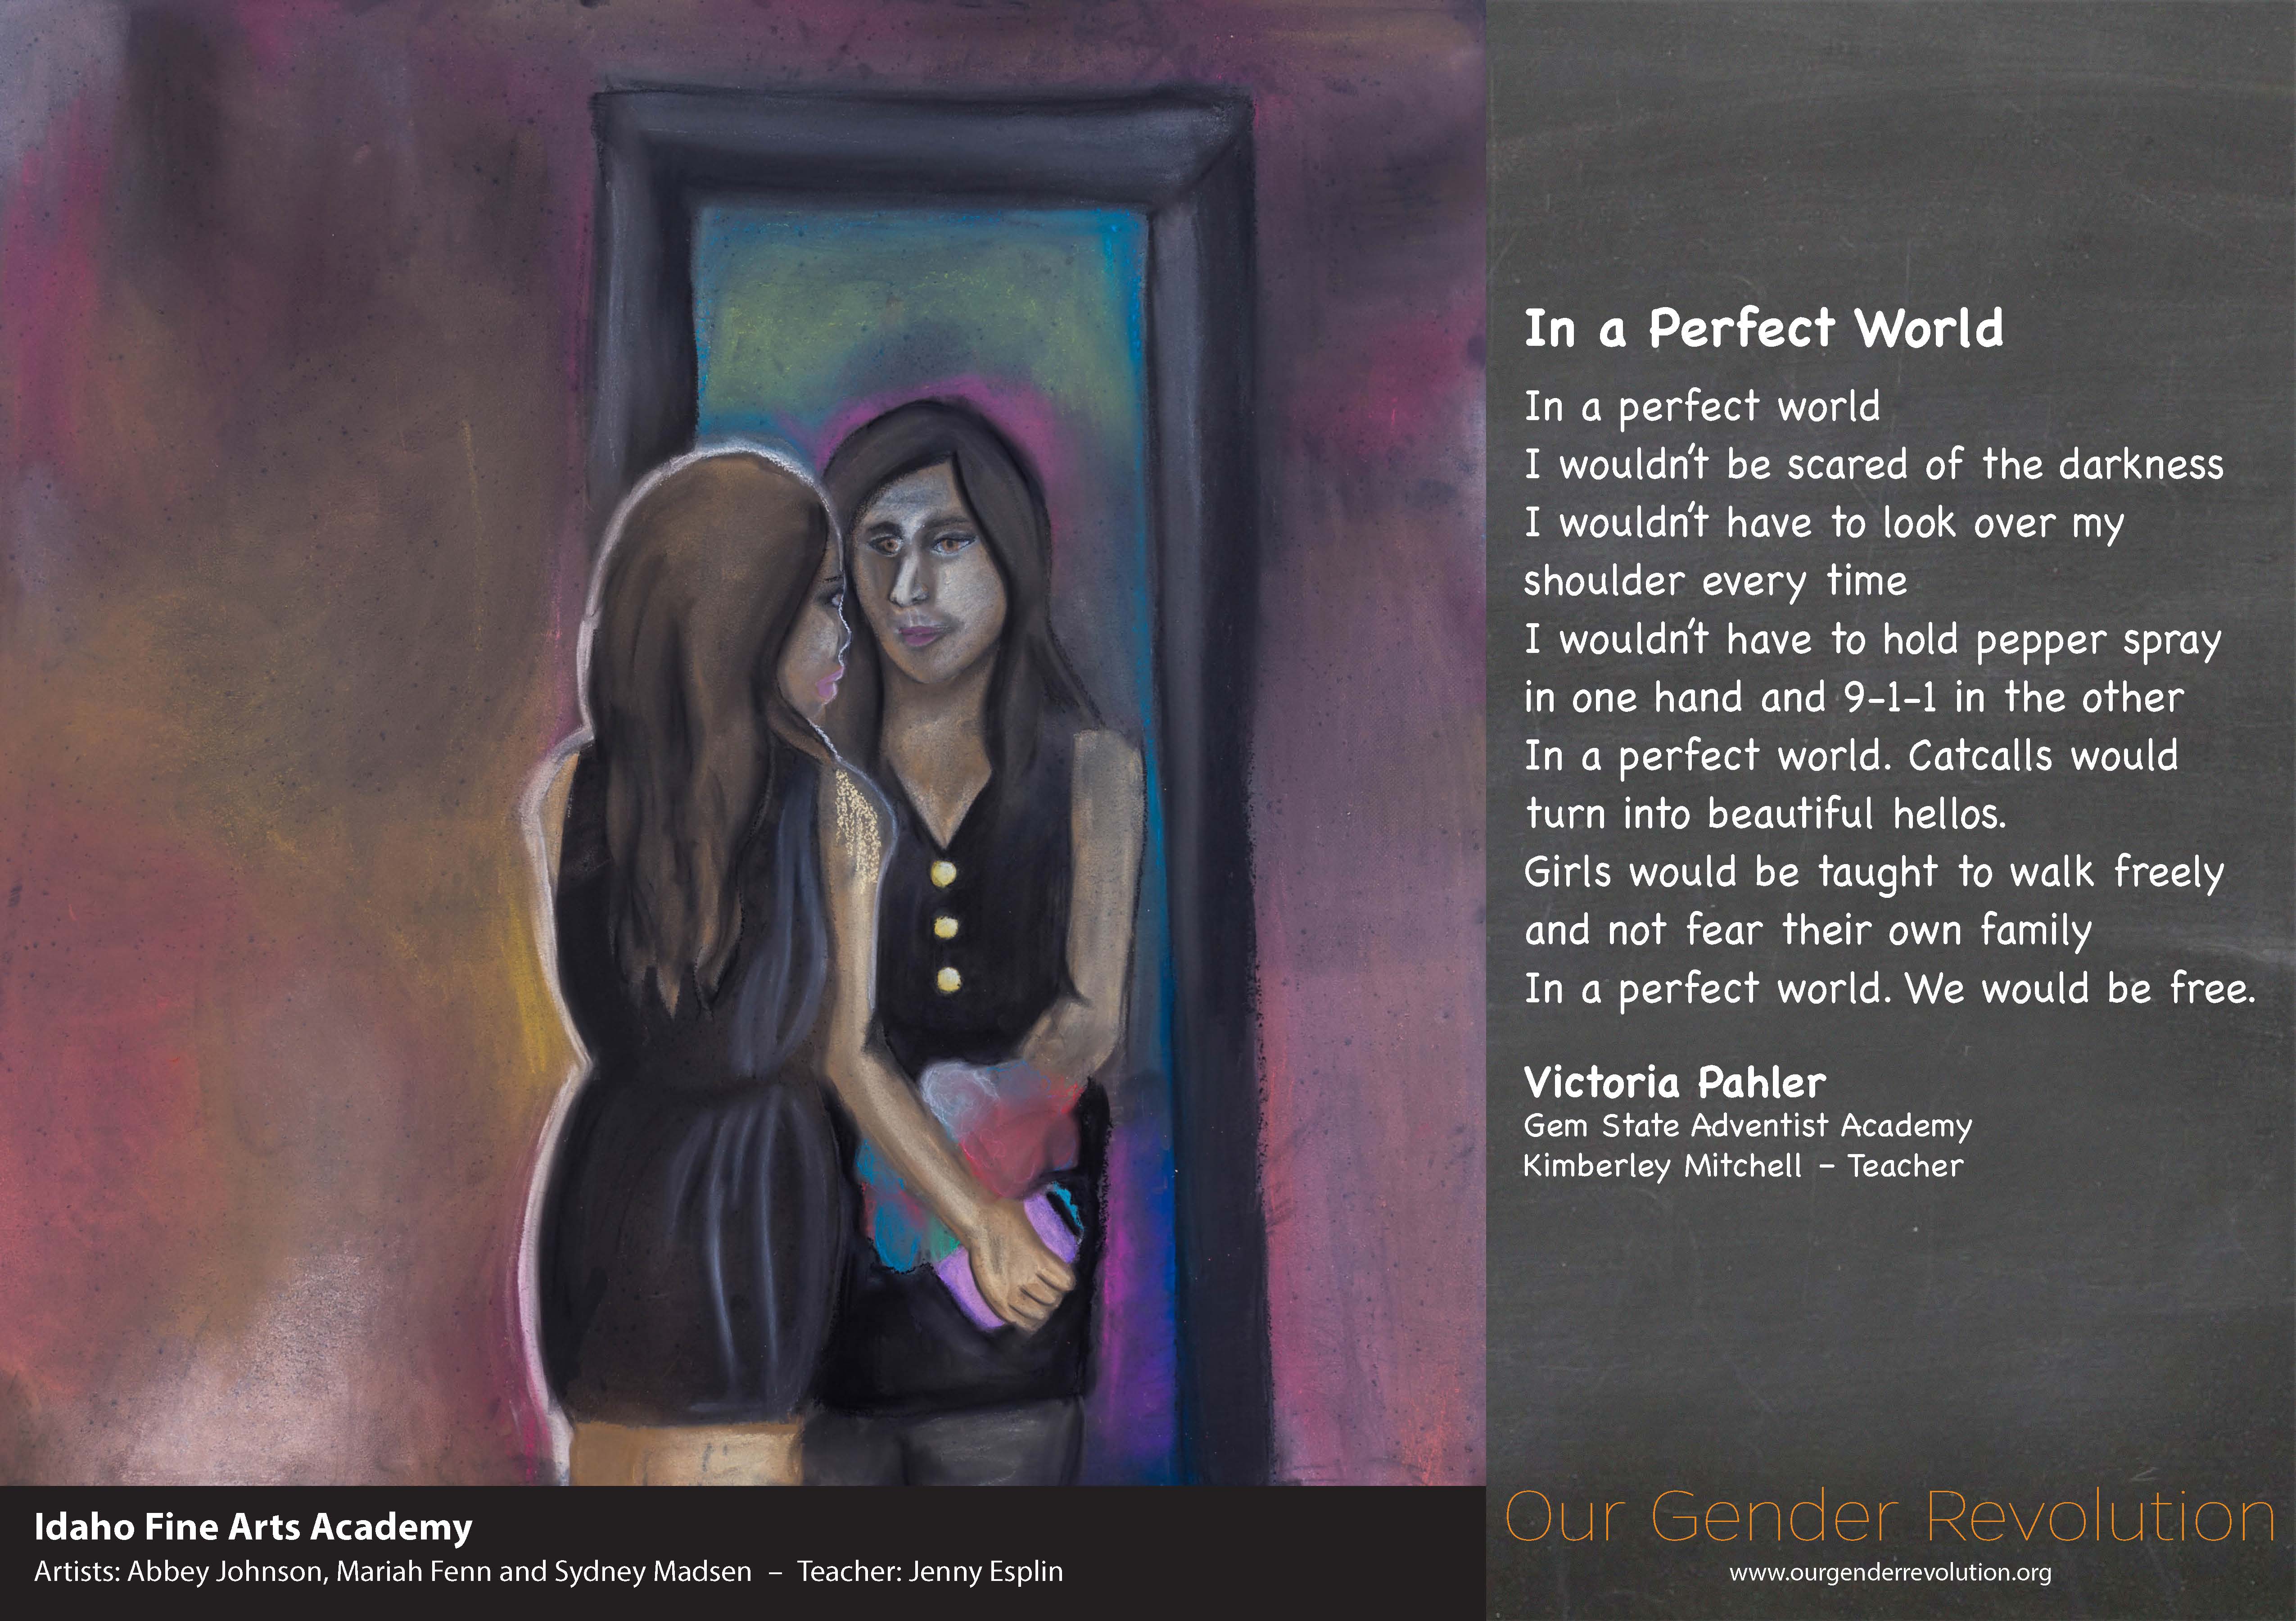 Idaho Fine Arts Academy - In A Perfect World by Victoria Pahler